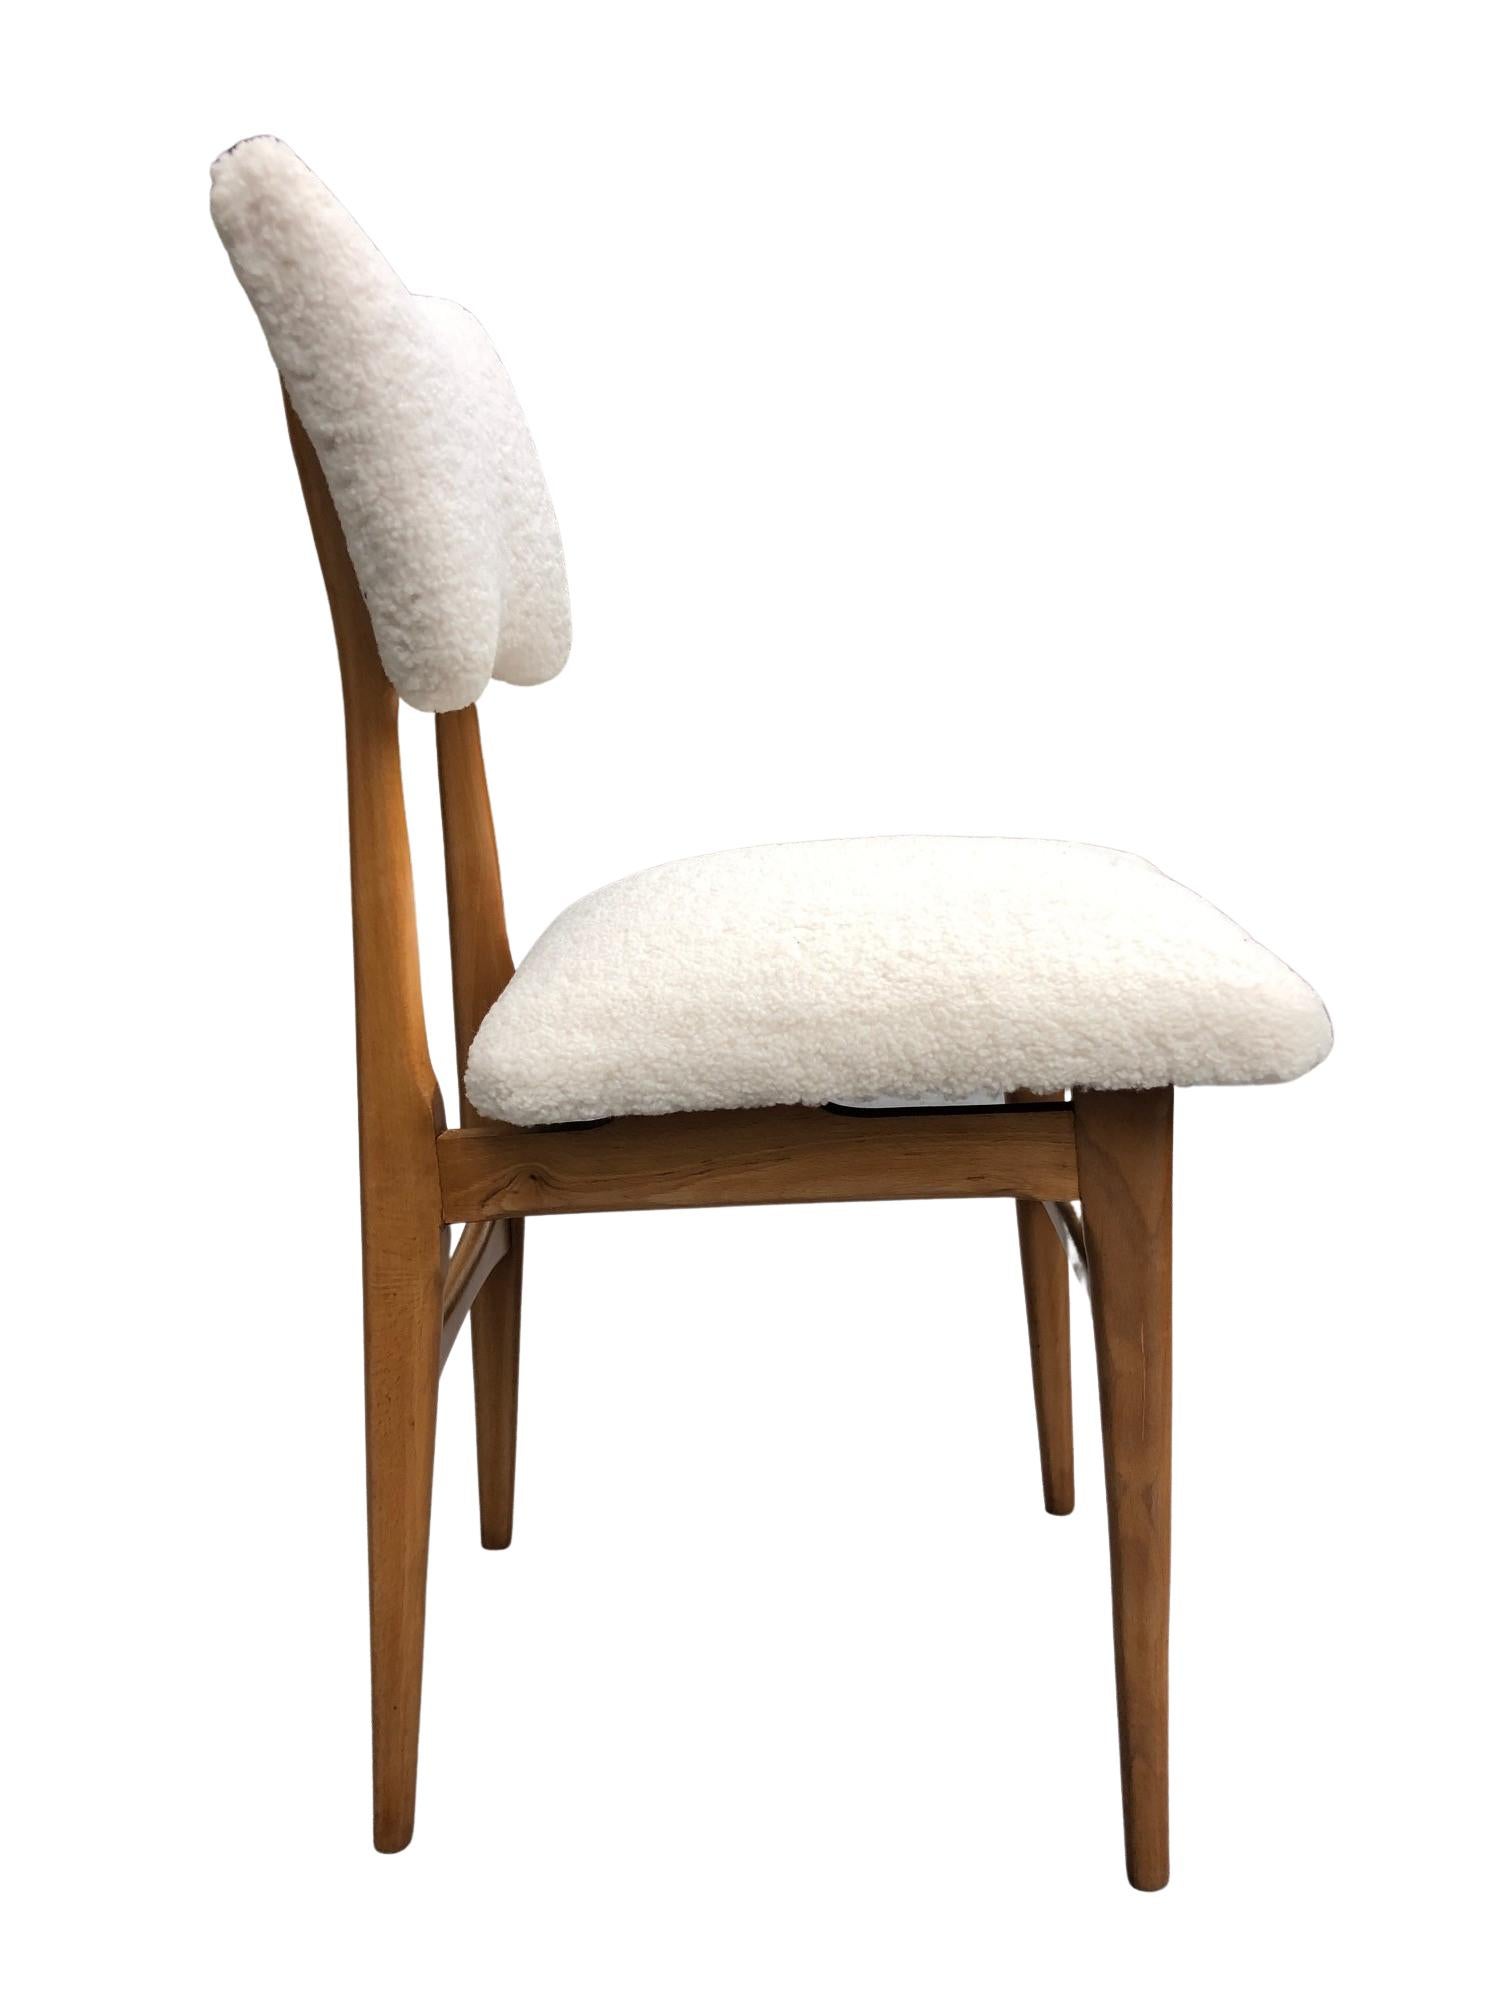 Midcentury Cream Bouclé and Wood Dining Chairs, Europe, 1960s, Set of Two For Sale 5